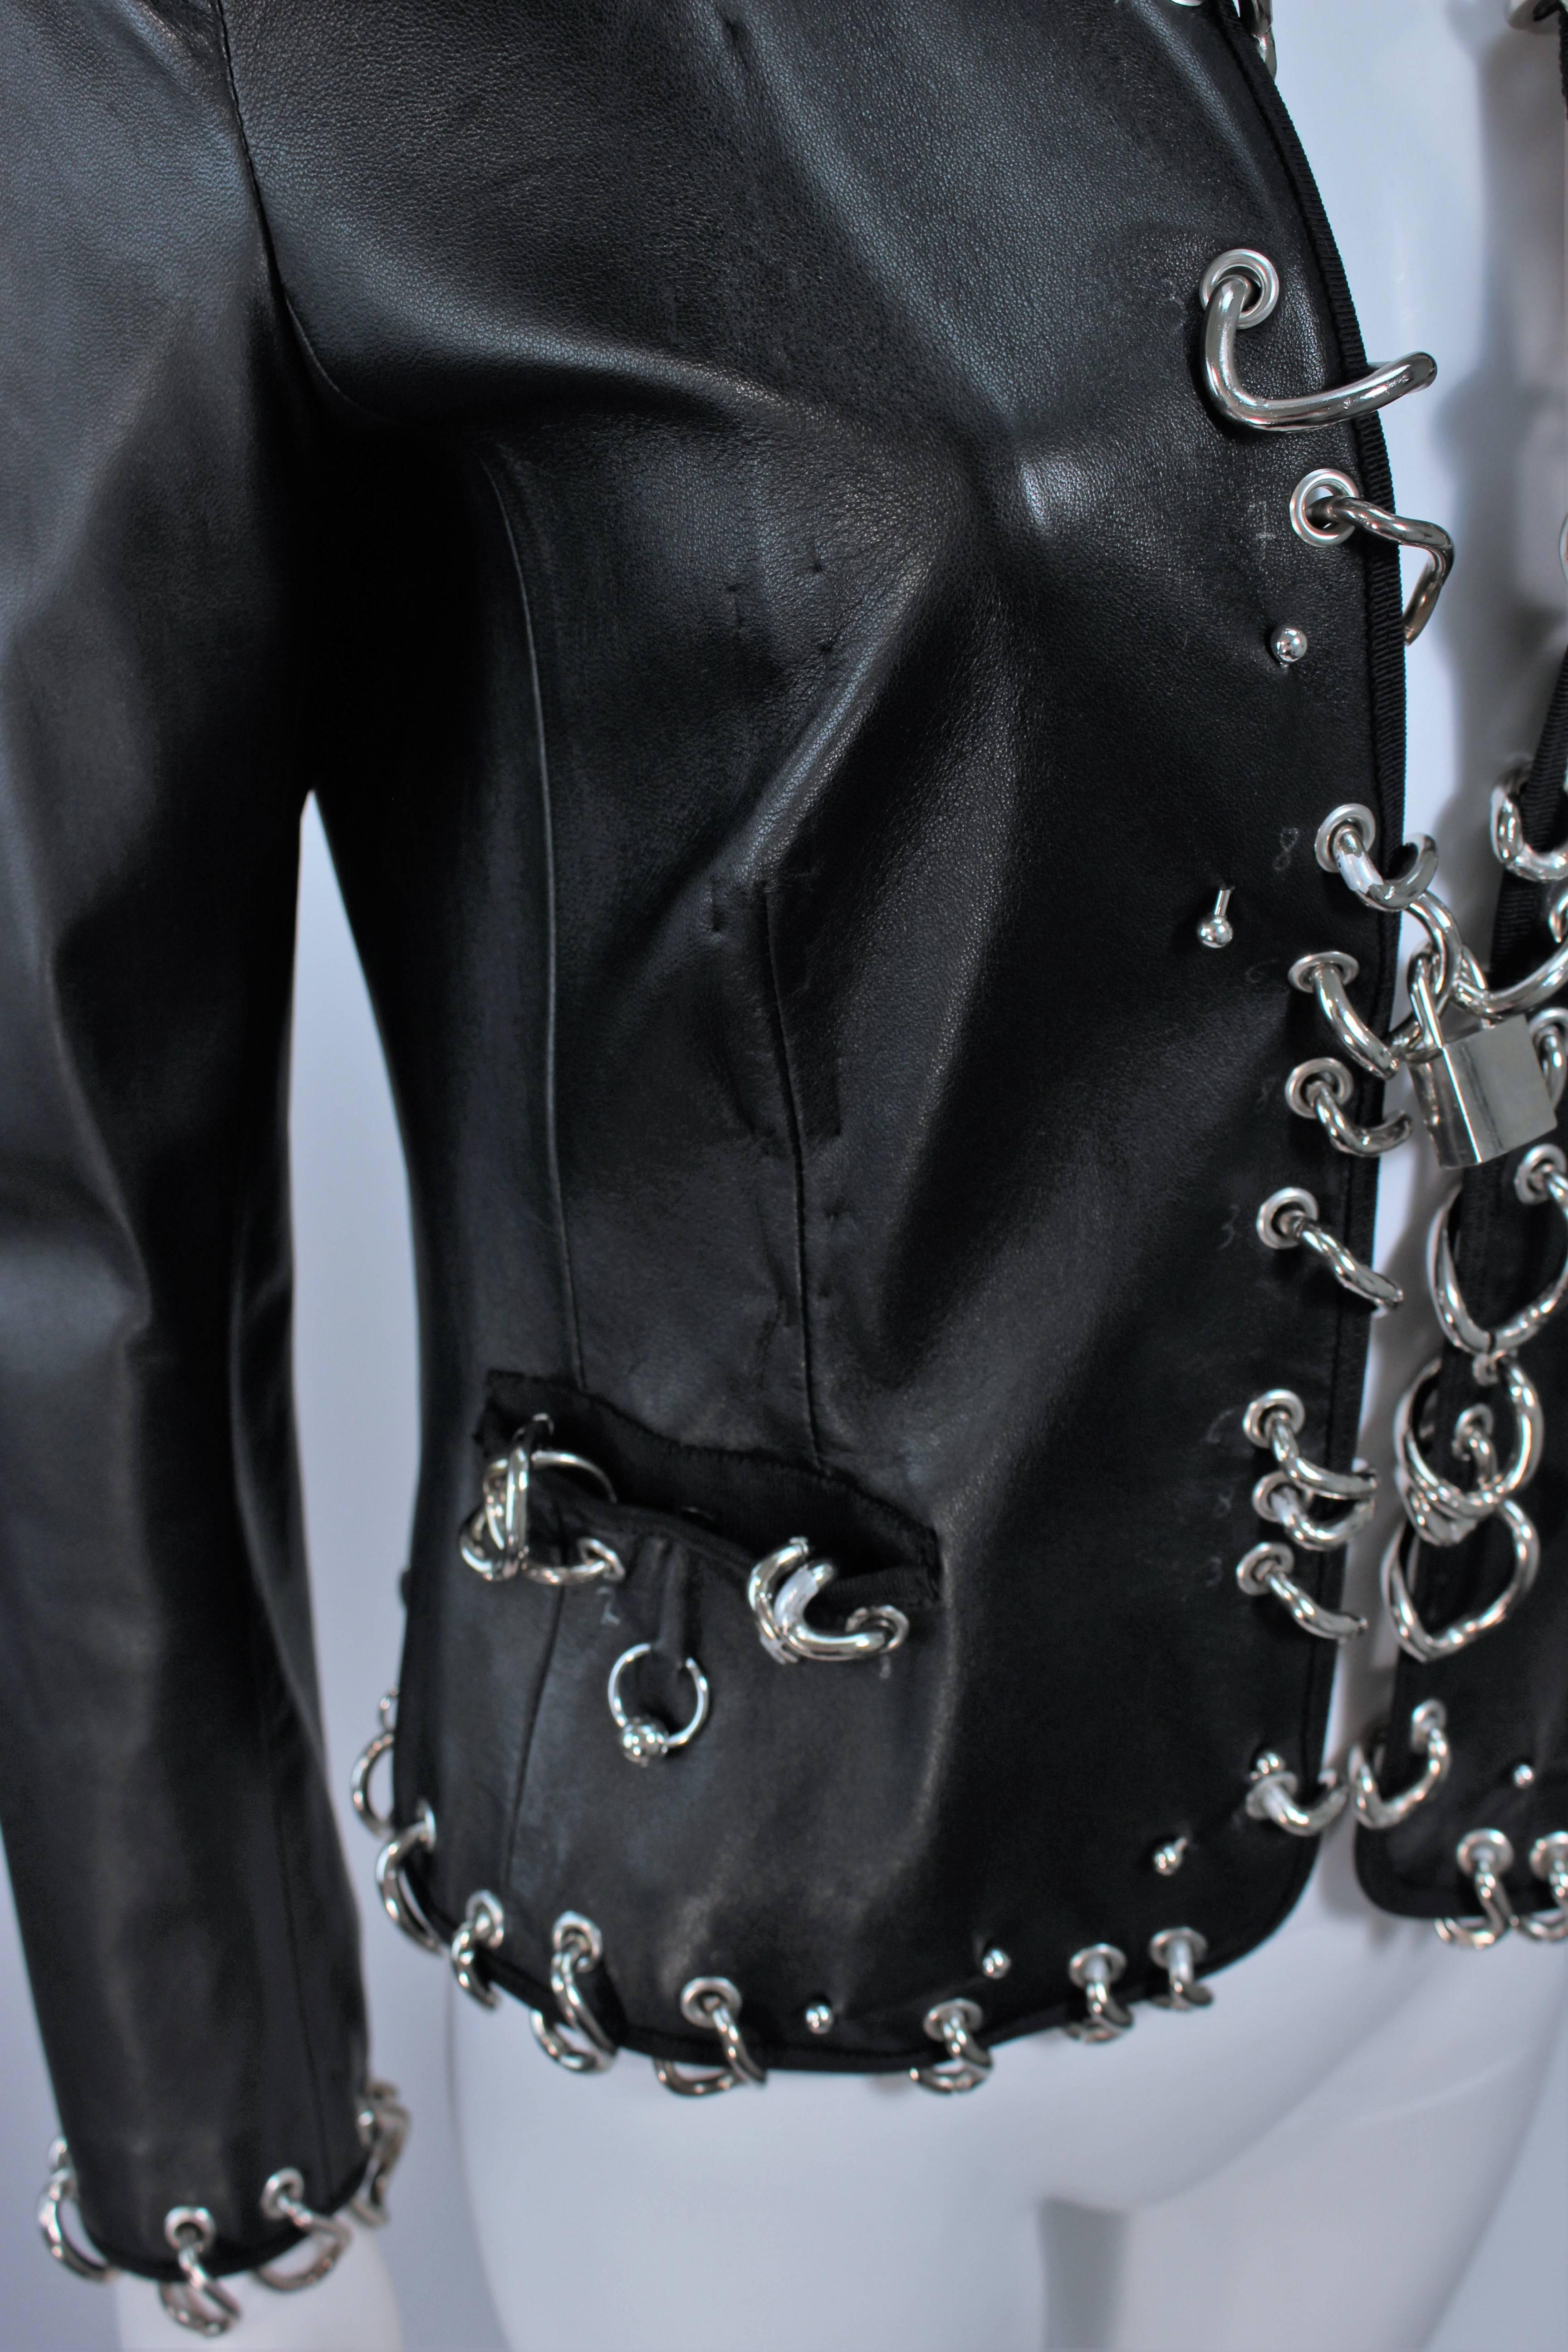 Black MOSCHINO RARE Fetish Piercings and Chains Leather Lamb Skin Jacket Size 40 8